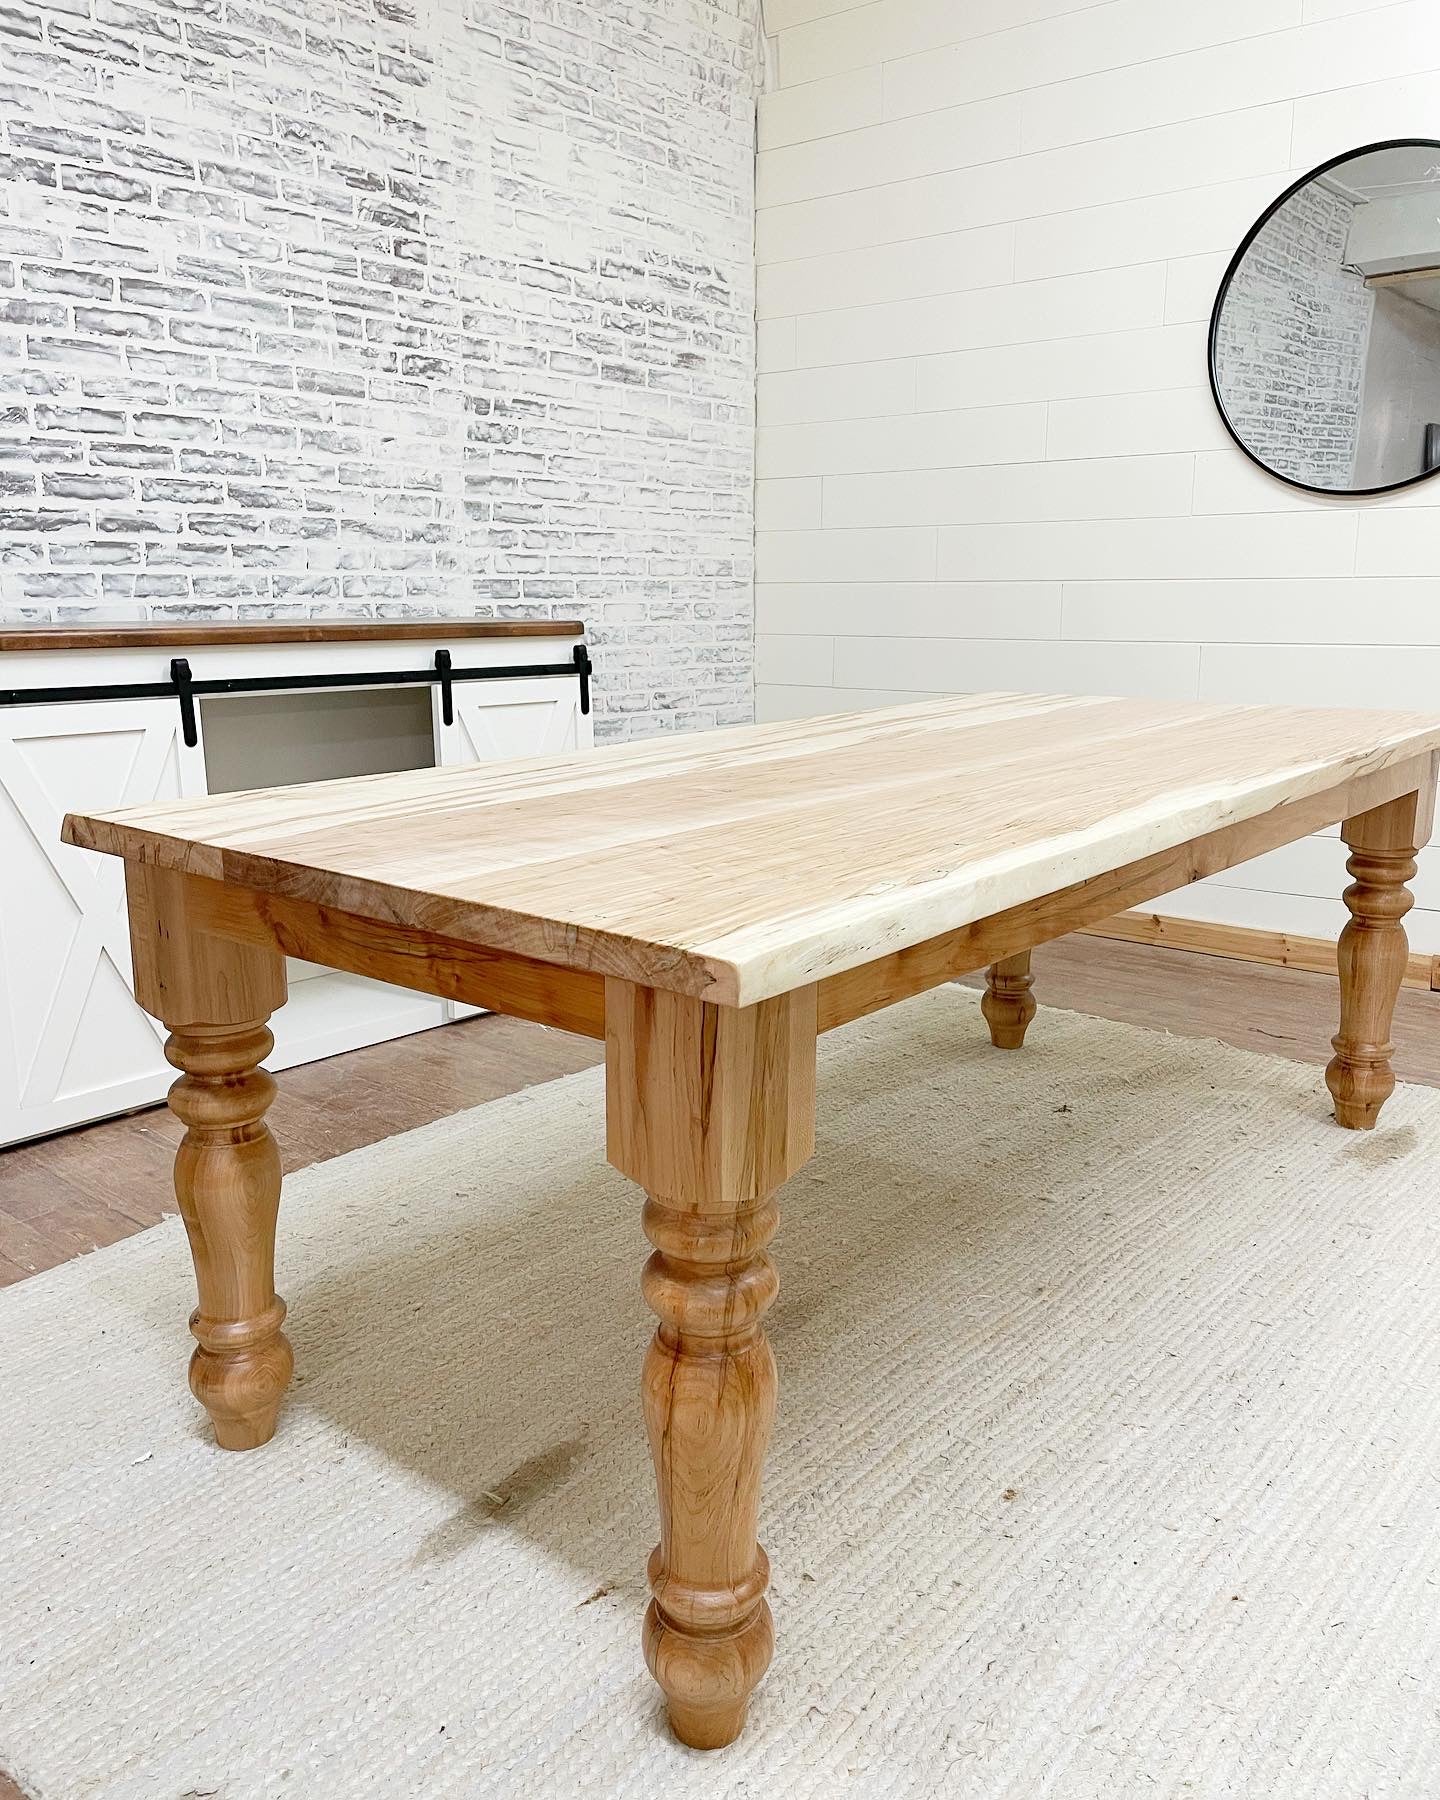 Pictured with a 7'L x 36"W Ambrosia Maple table with a Natural finish.